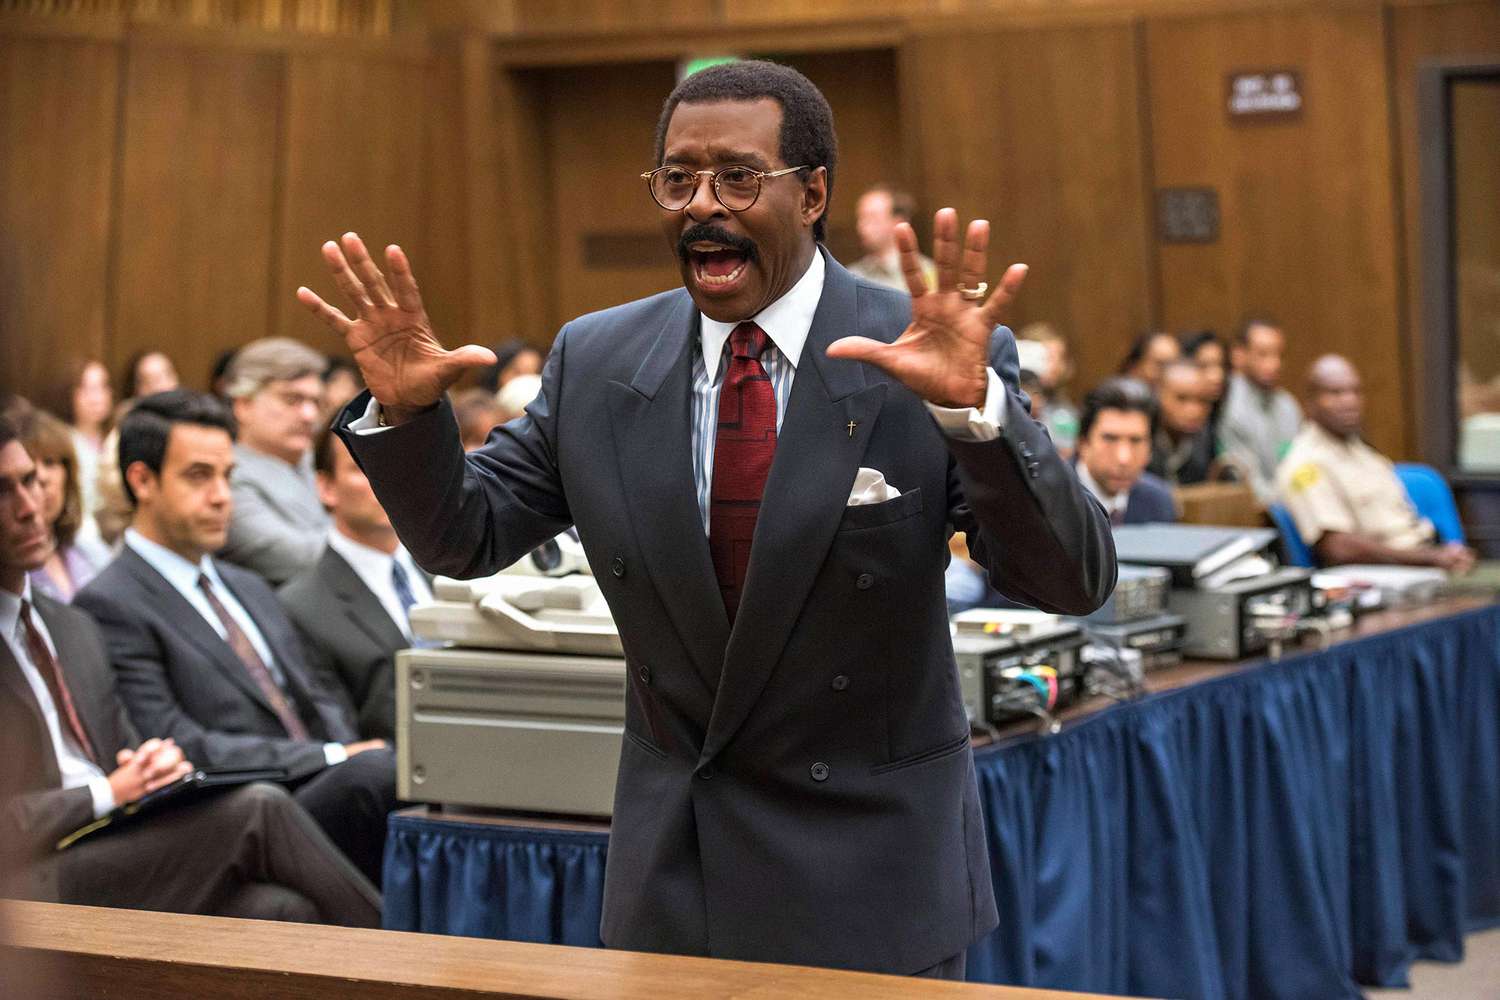 THE PEOPLE v. O.J. SIMPSON: AMERICAN CRIME STORY